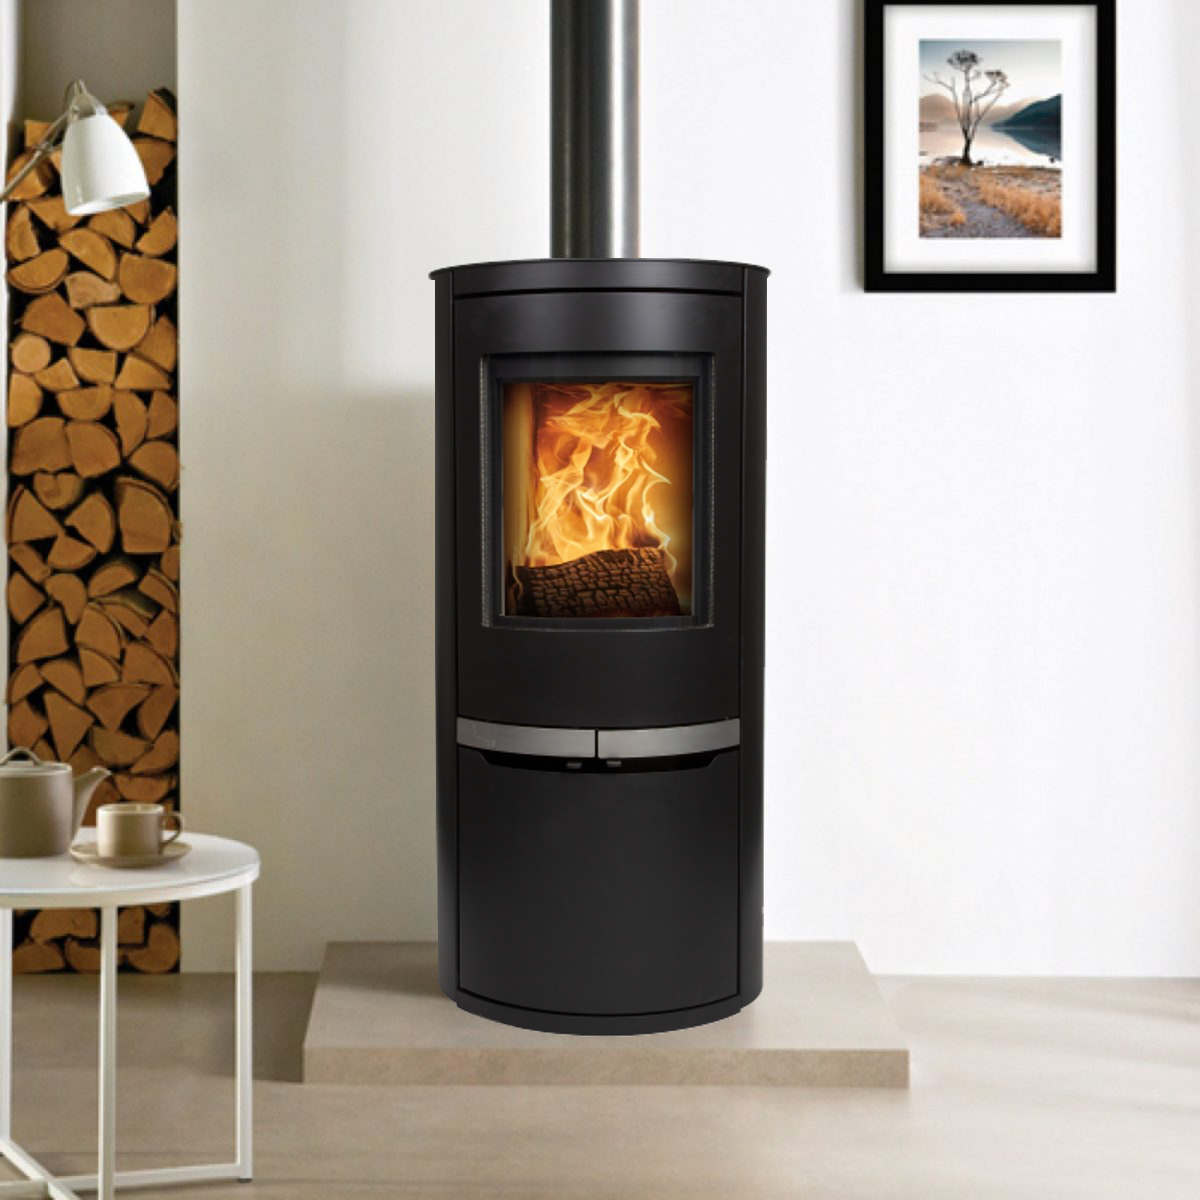 Ovale Tall wood burning stove with door 5kW Eco-Design/DEFRA approved Contemporary/ Modern